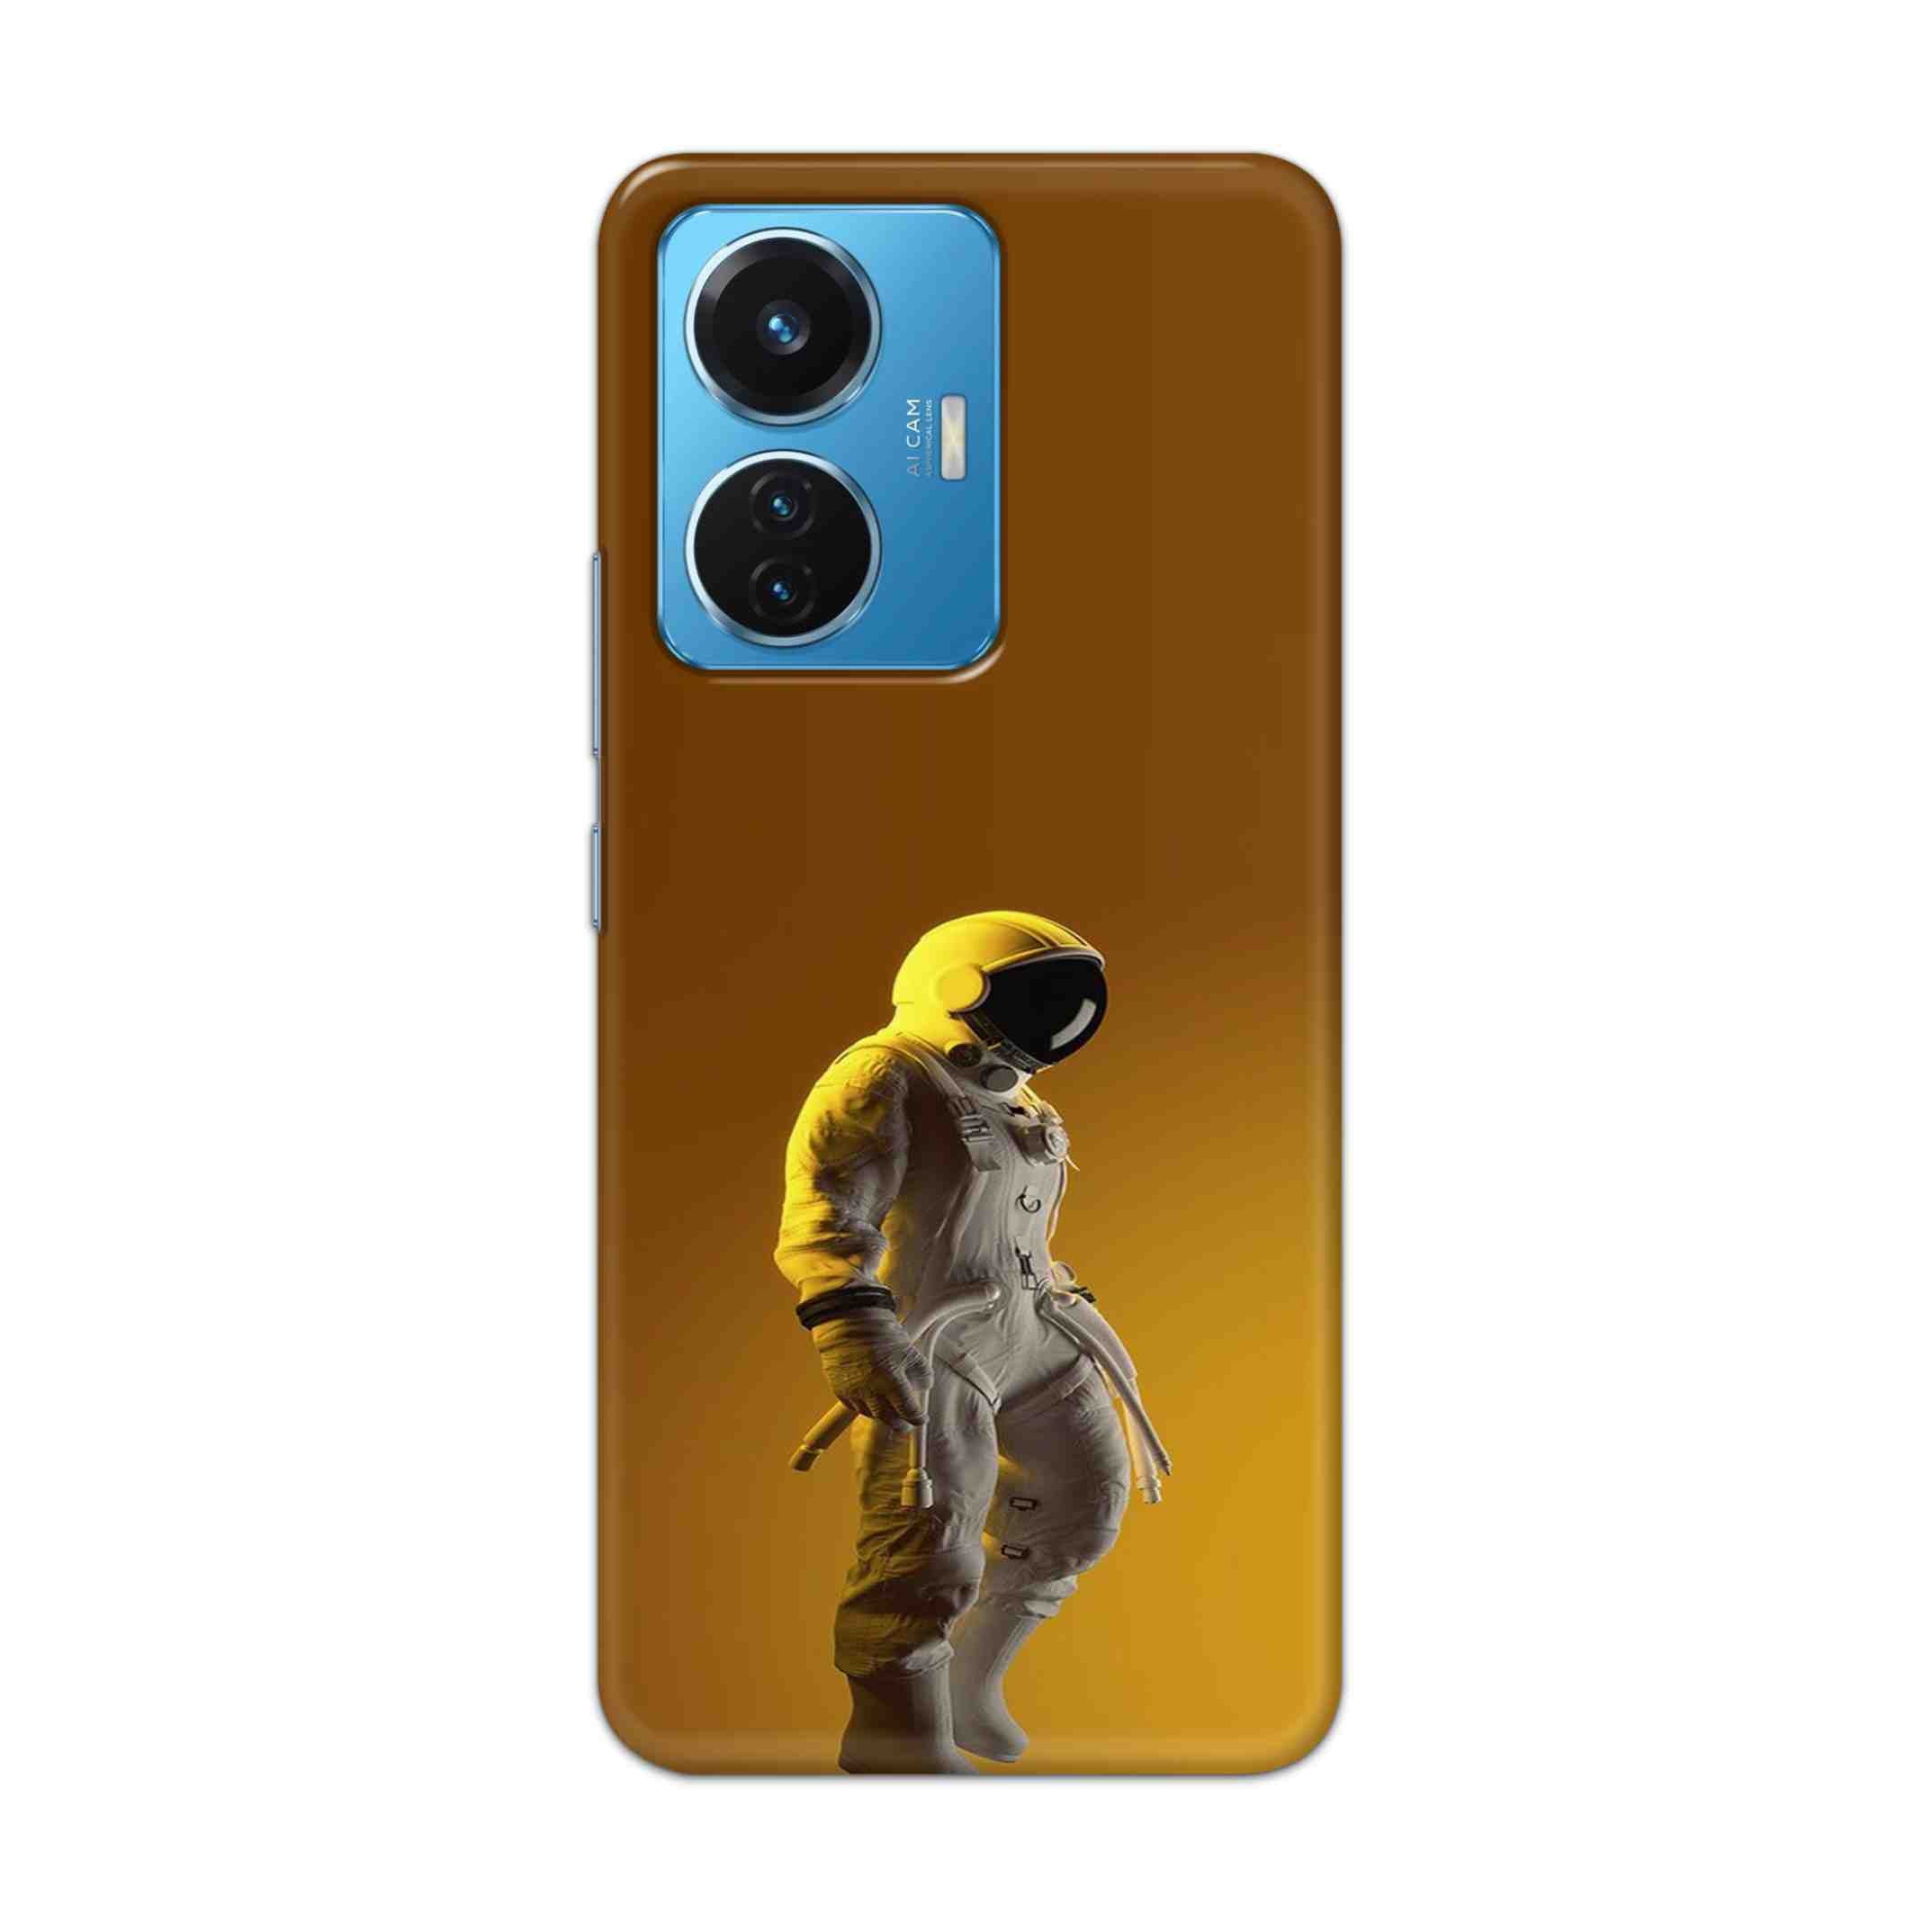 Buy Yellow Astronaut Hard Back Mobile Phone Case Cover For Vivo T1 44W Online